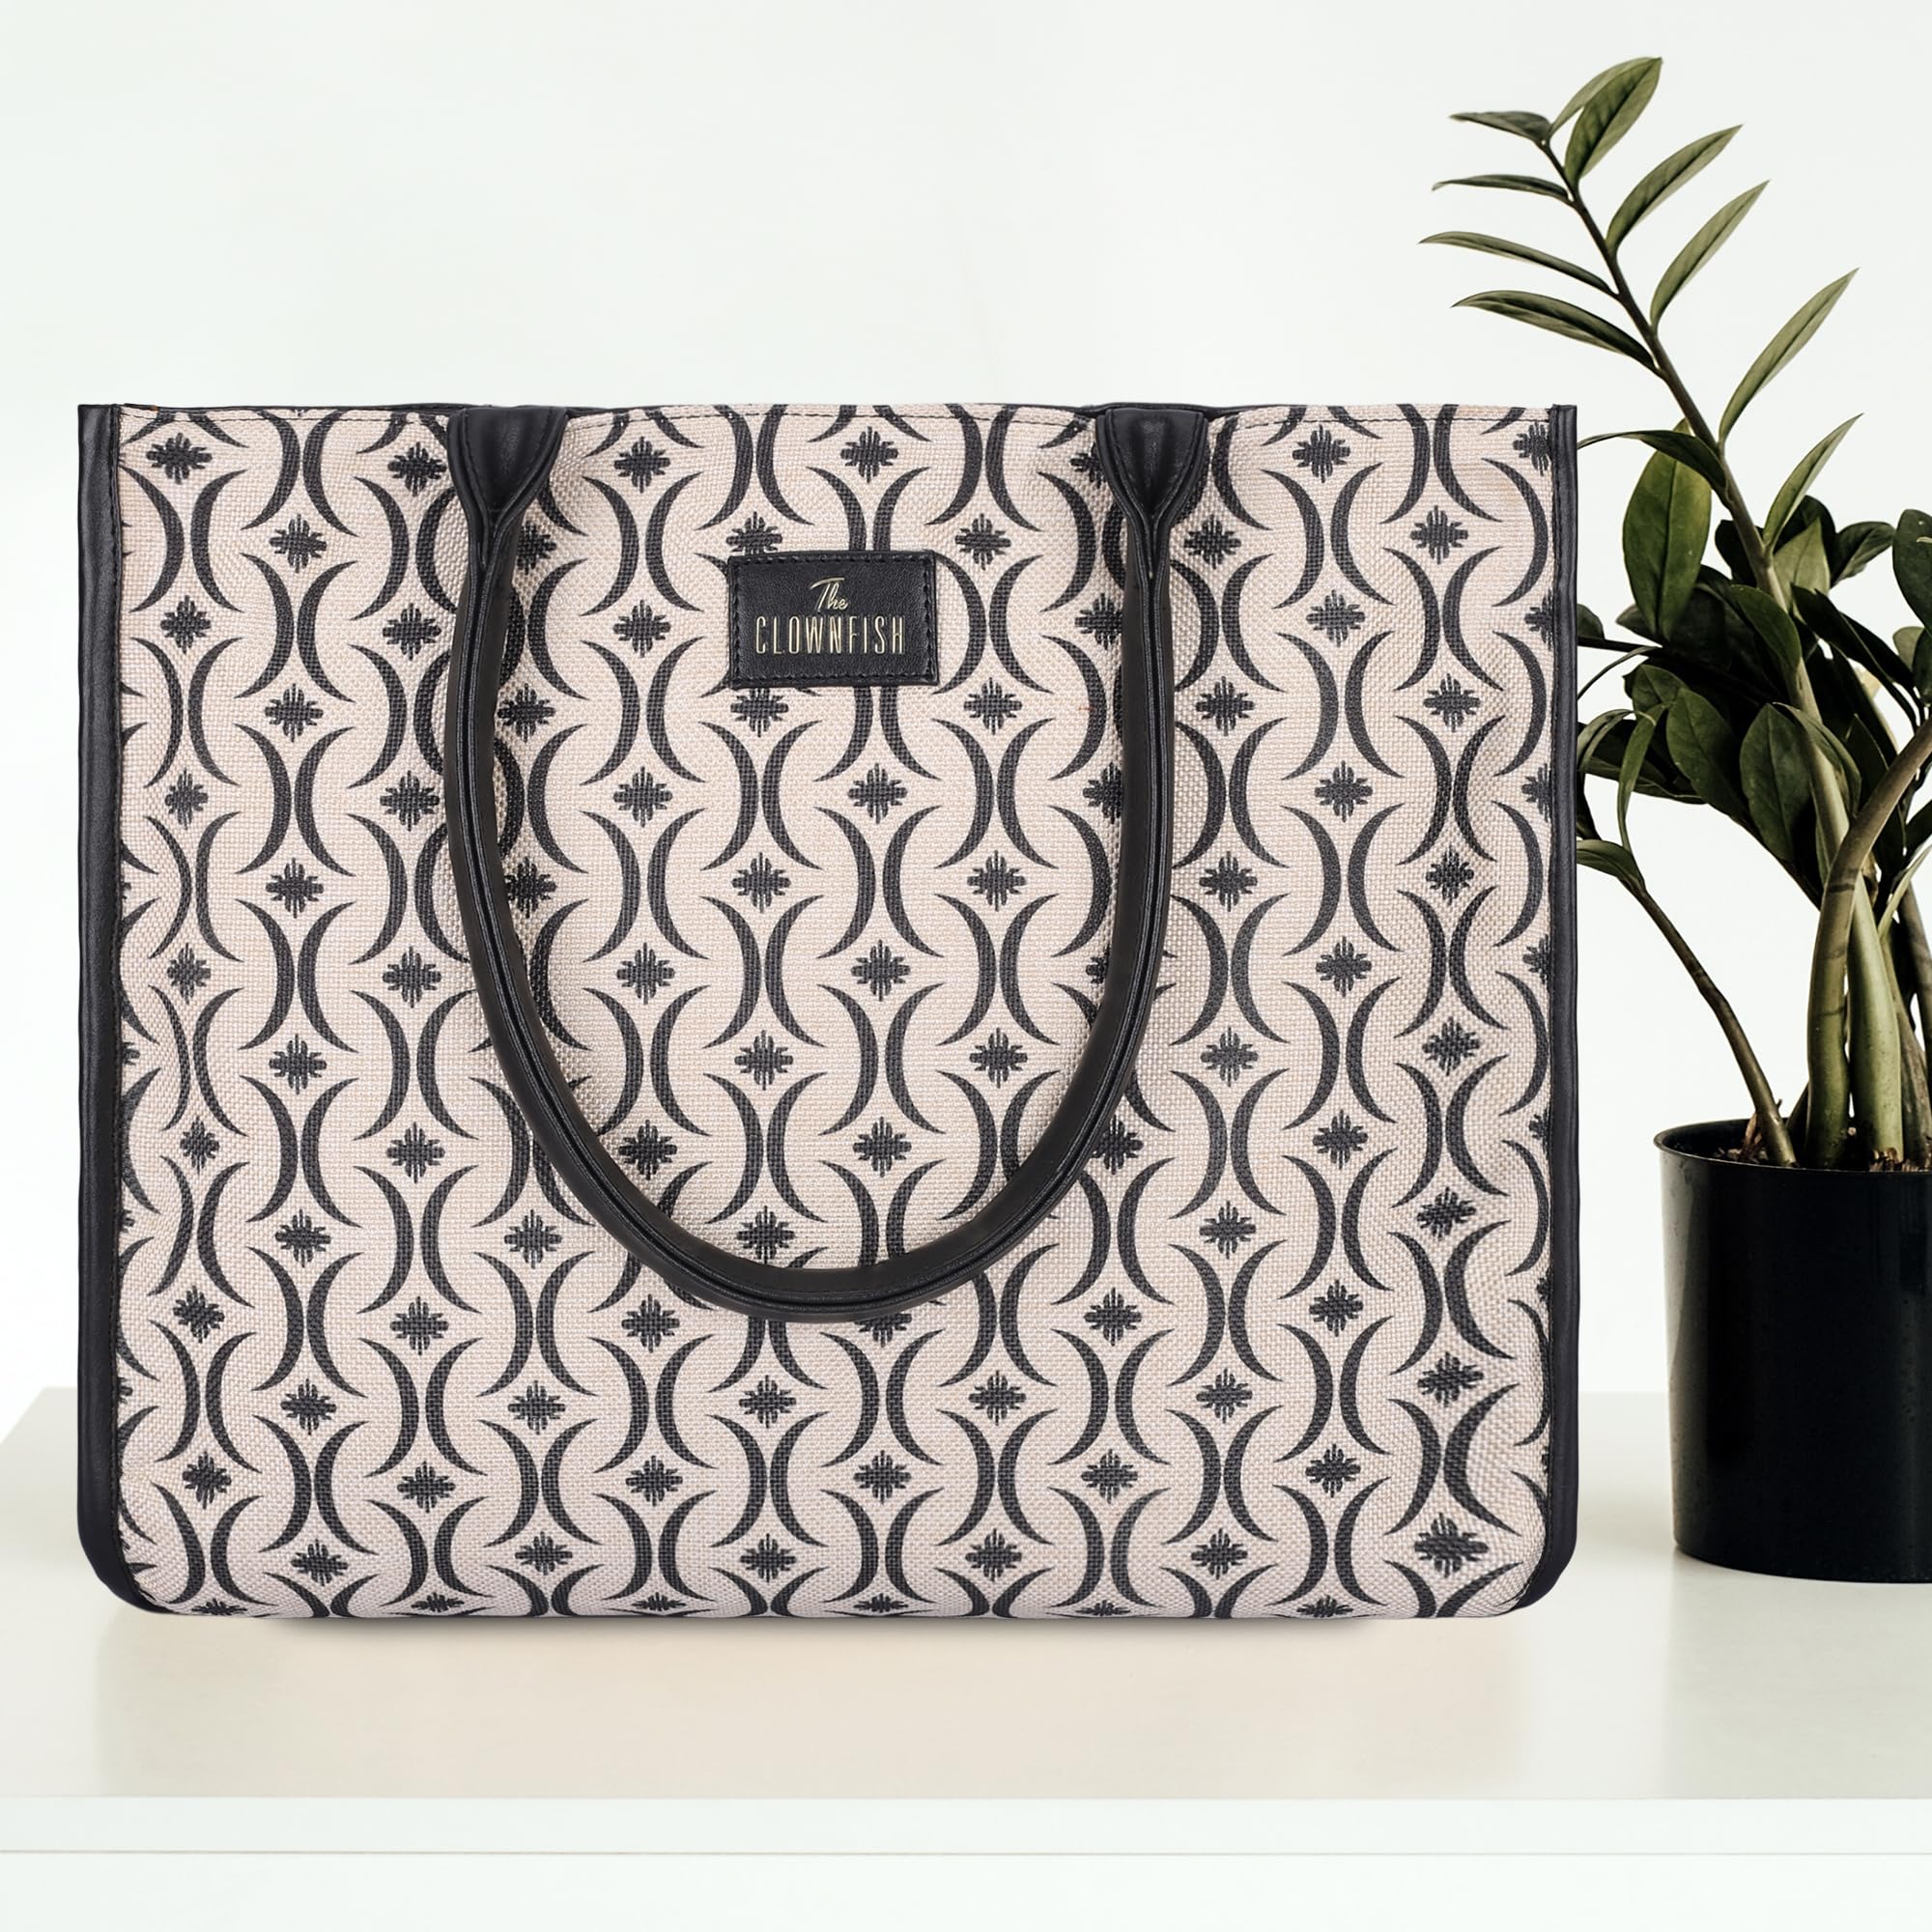 Buy Ladies Office Bag for Women in Black Print for 15.6 Inch Laptop at Best  Price @ Tata CLiQ